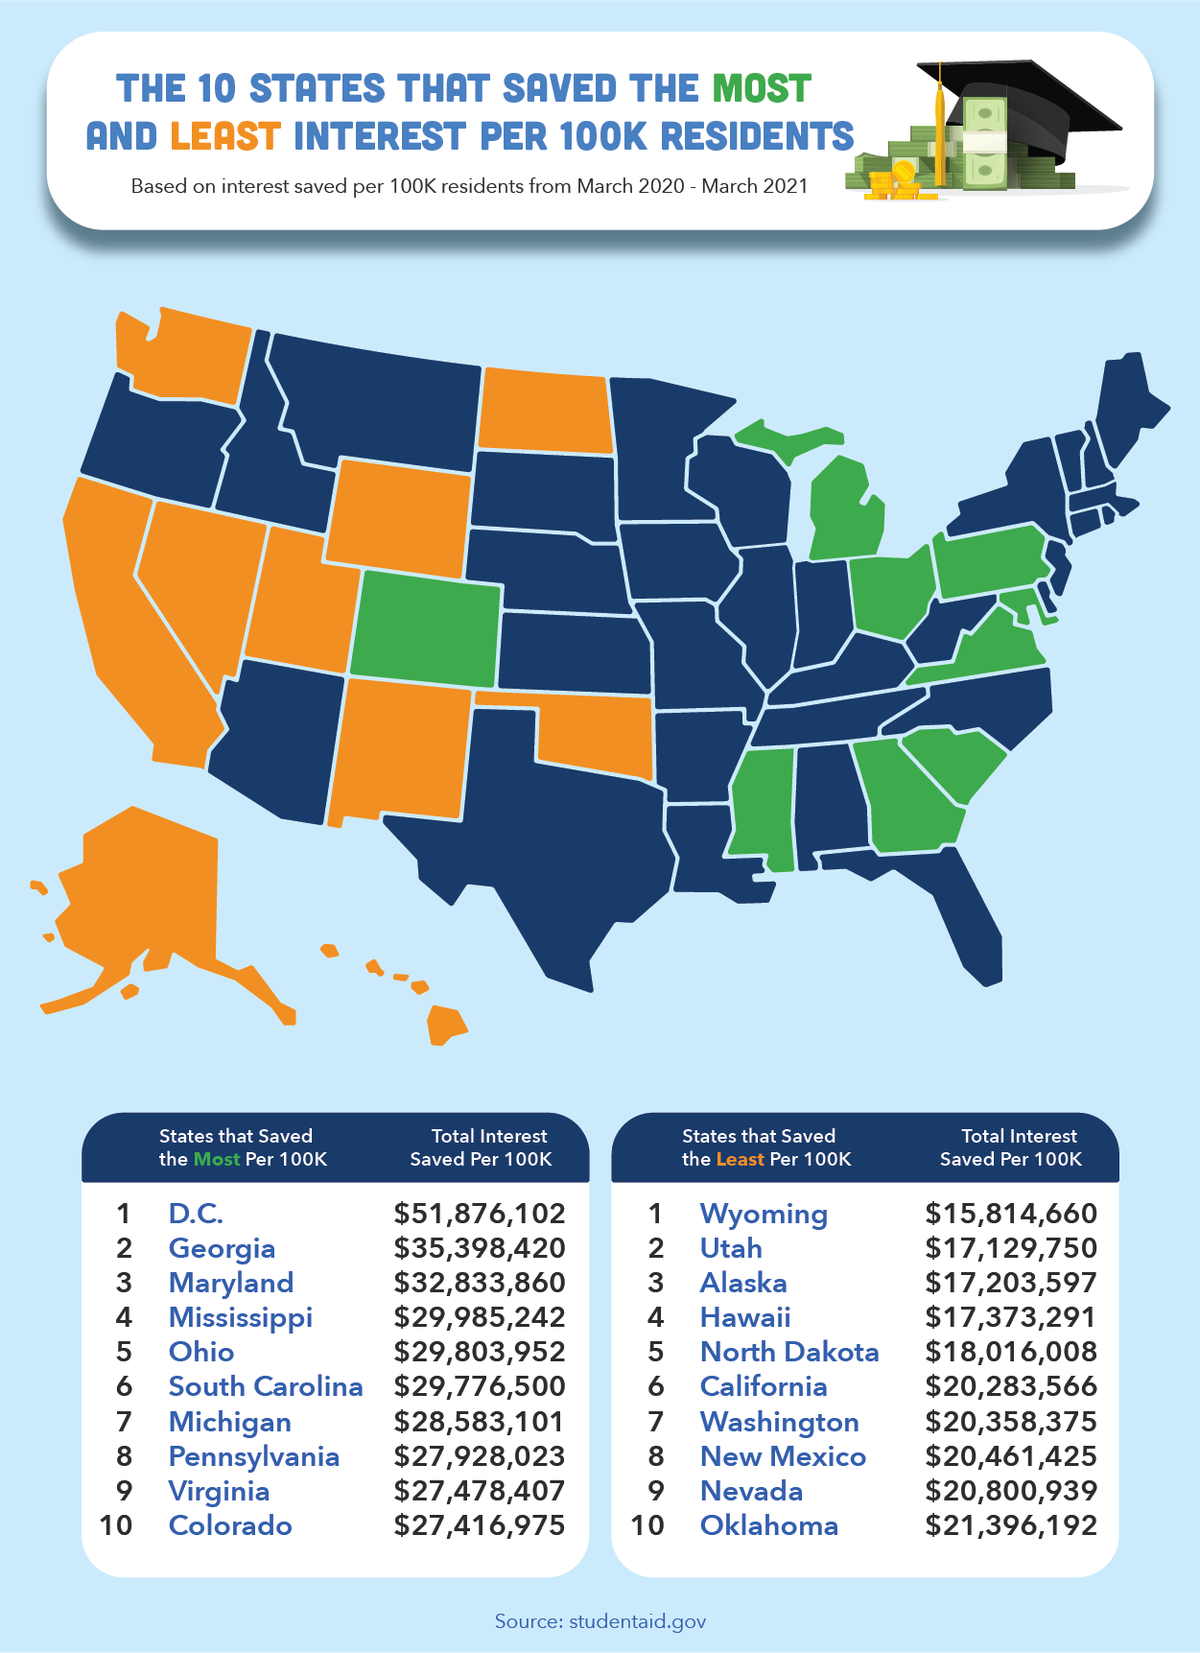 States that saved the most and least interest per 100k